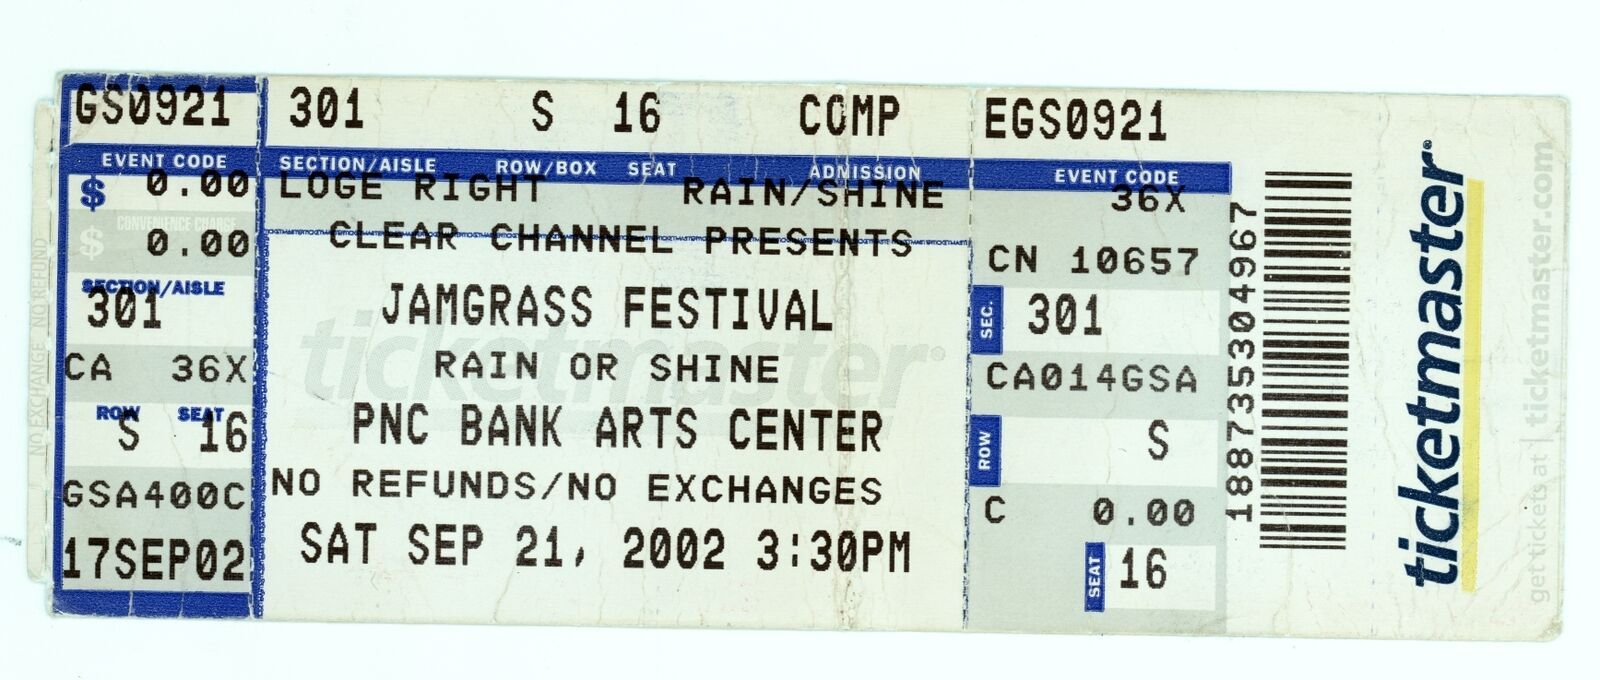 Rare Incubus & 30 Seconds To Mars 9/21/02 Holmdel Nj Jamgrass Festival Ticket!